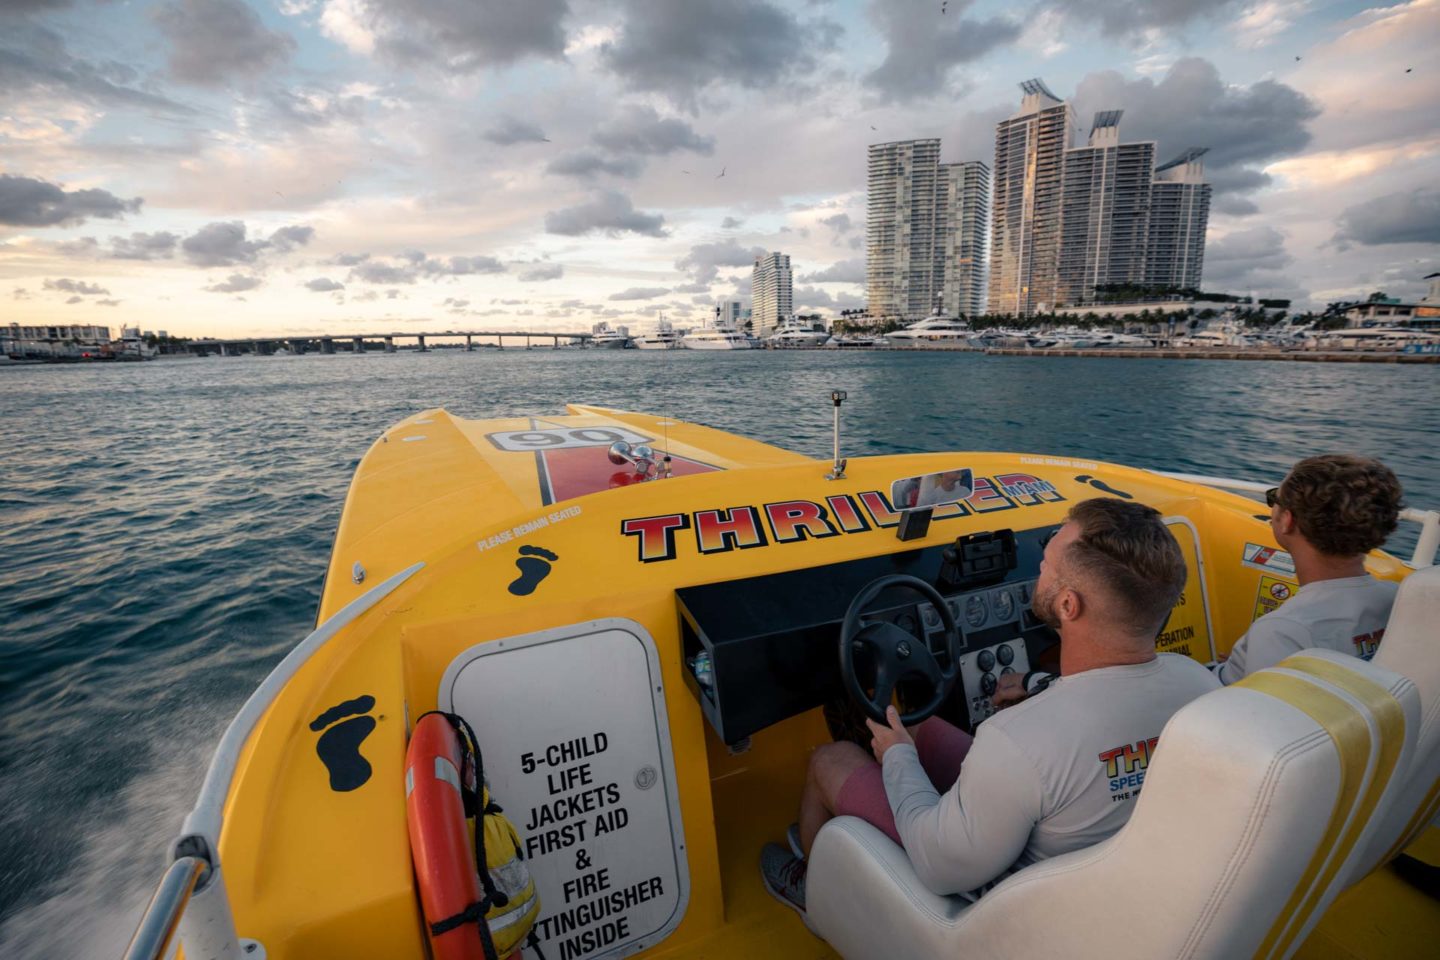 things to do in miami, fun things to do in miami, miami attractions, best things to do in miami, places to visit in miami, places to go in miami, things to do in miami florida